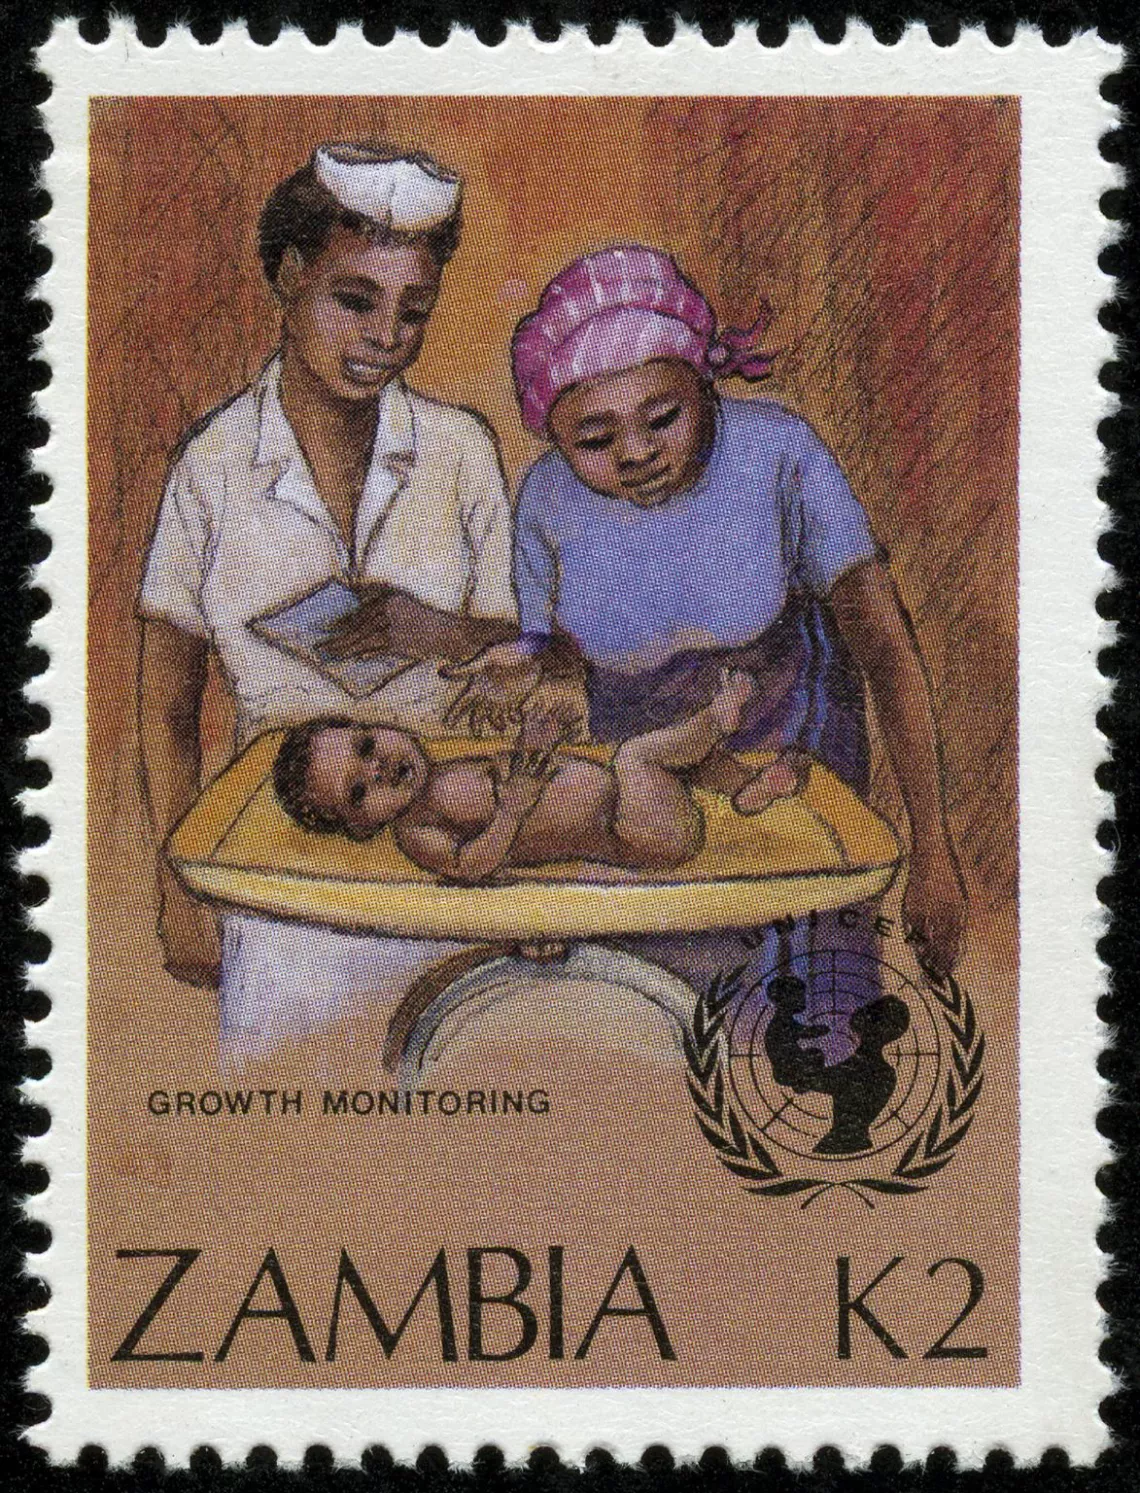 Postage stamp shows nurse and mother looking at baby